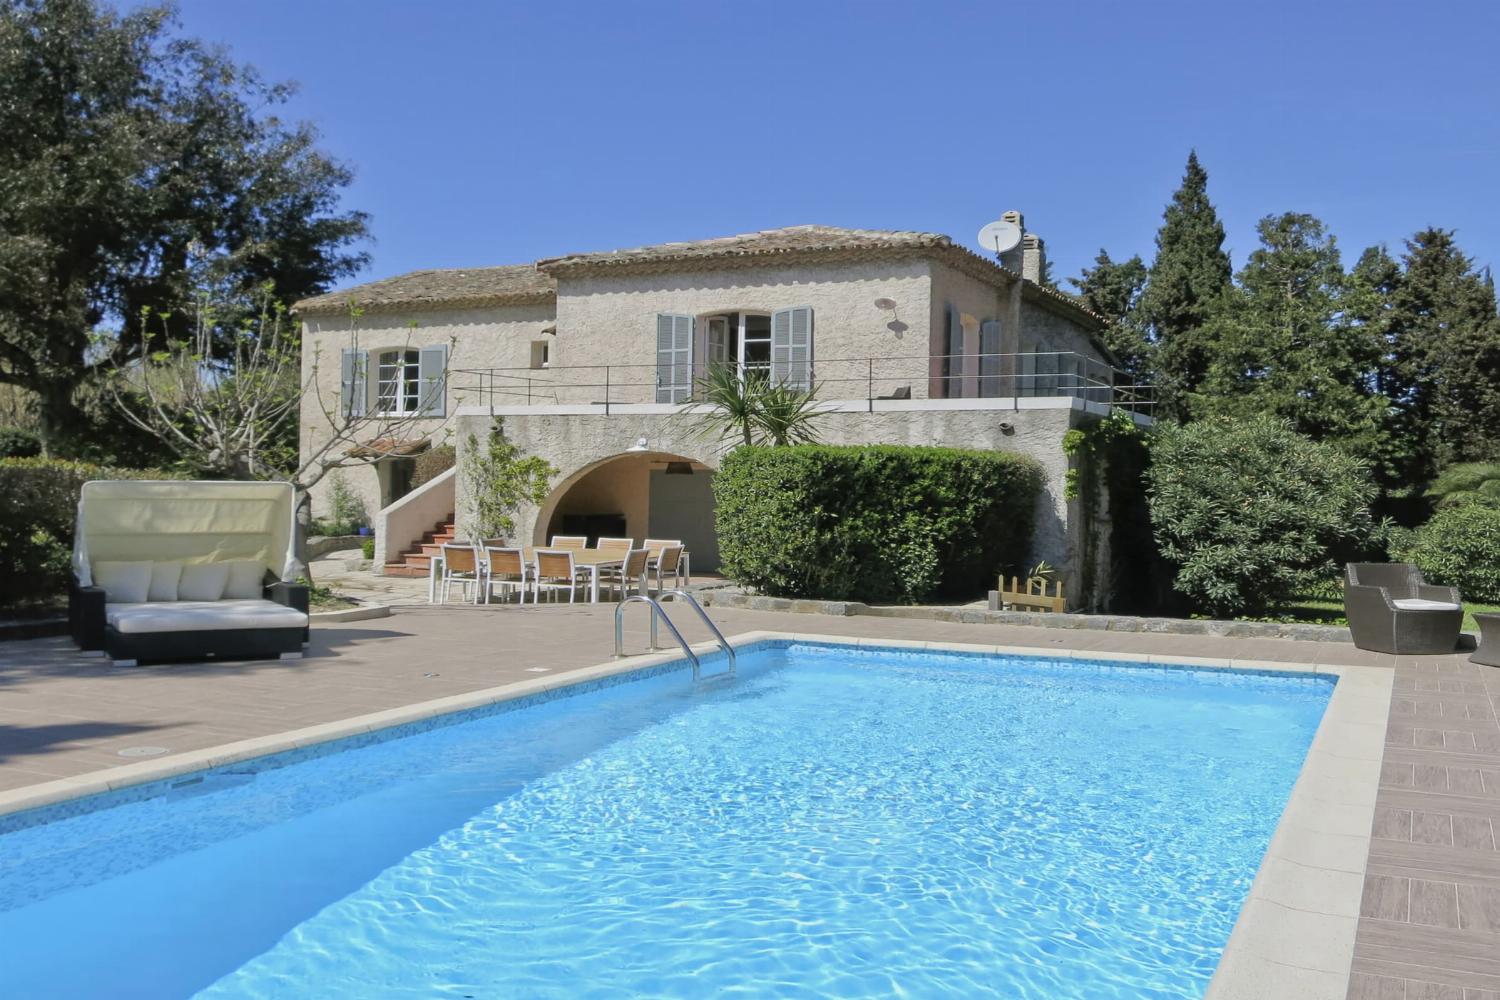 Rental villa in Saint-Tropez with private pool